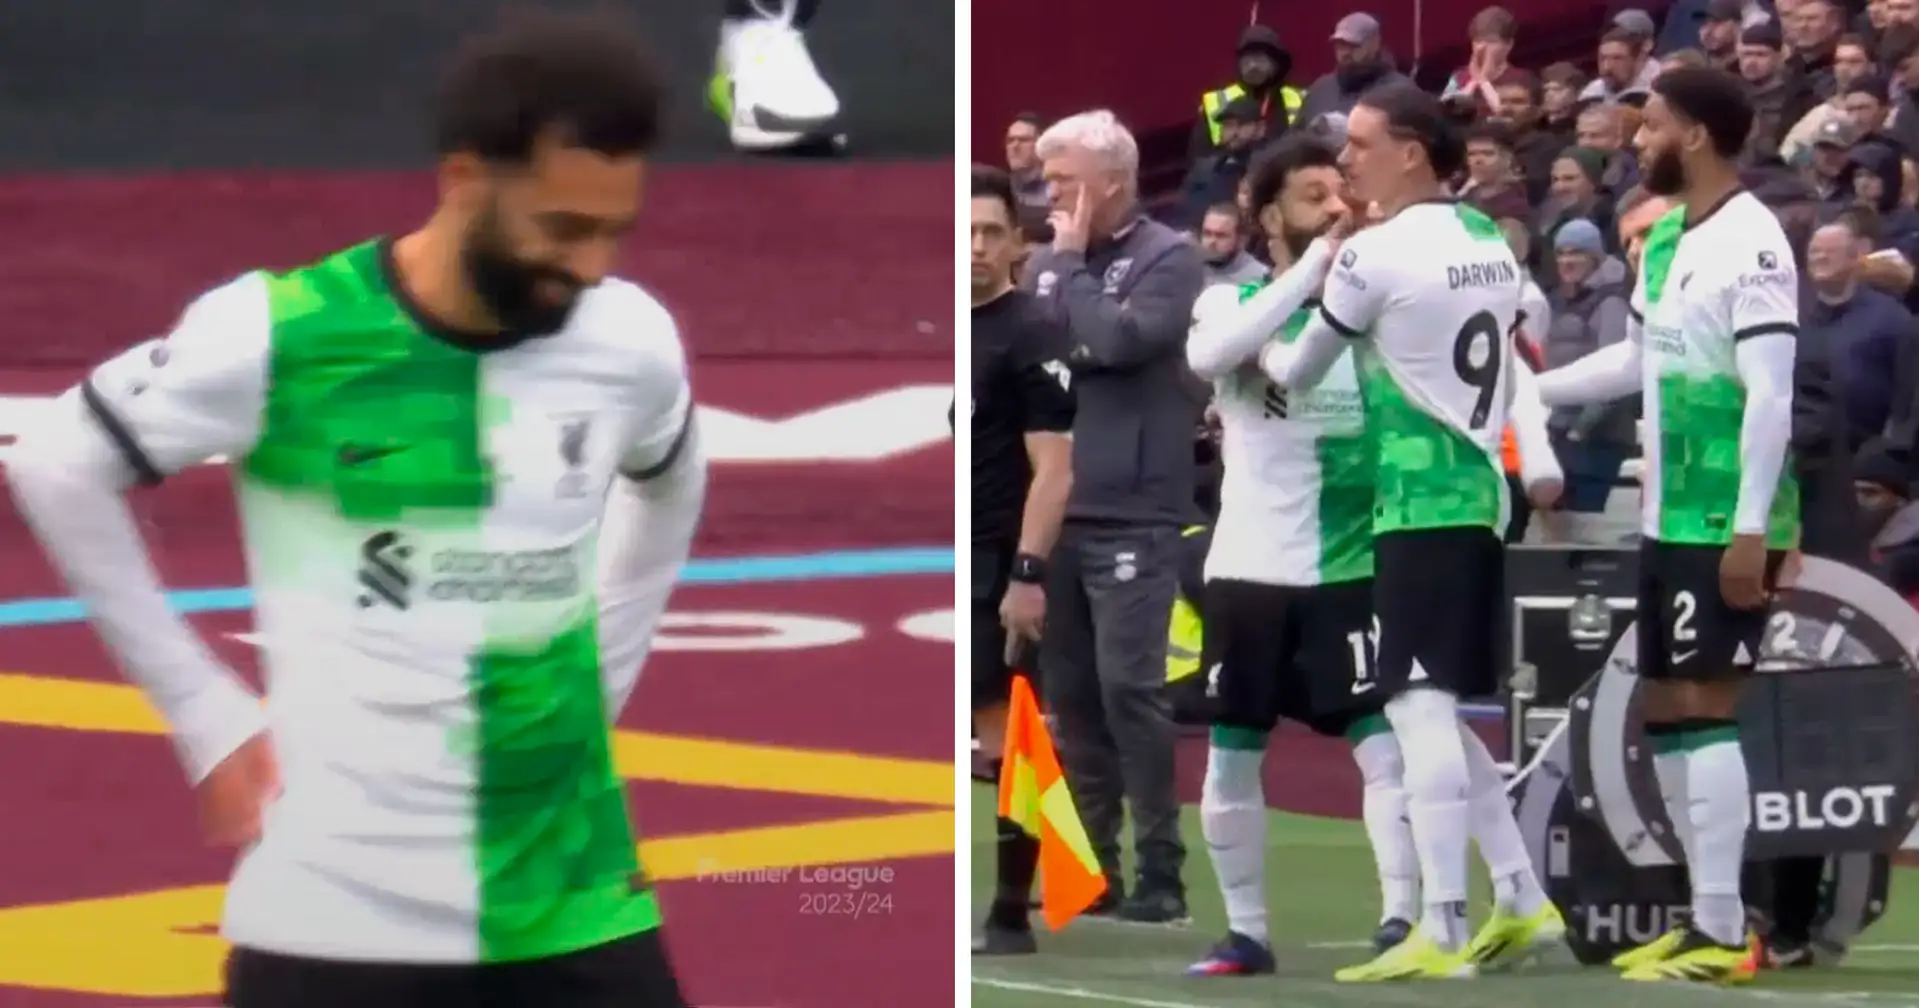 Spotted: why Klopp and Salah were arguing - it likely has to do with what Mohamed did a few minutes earlier